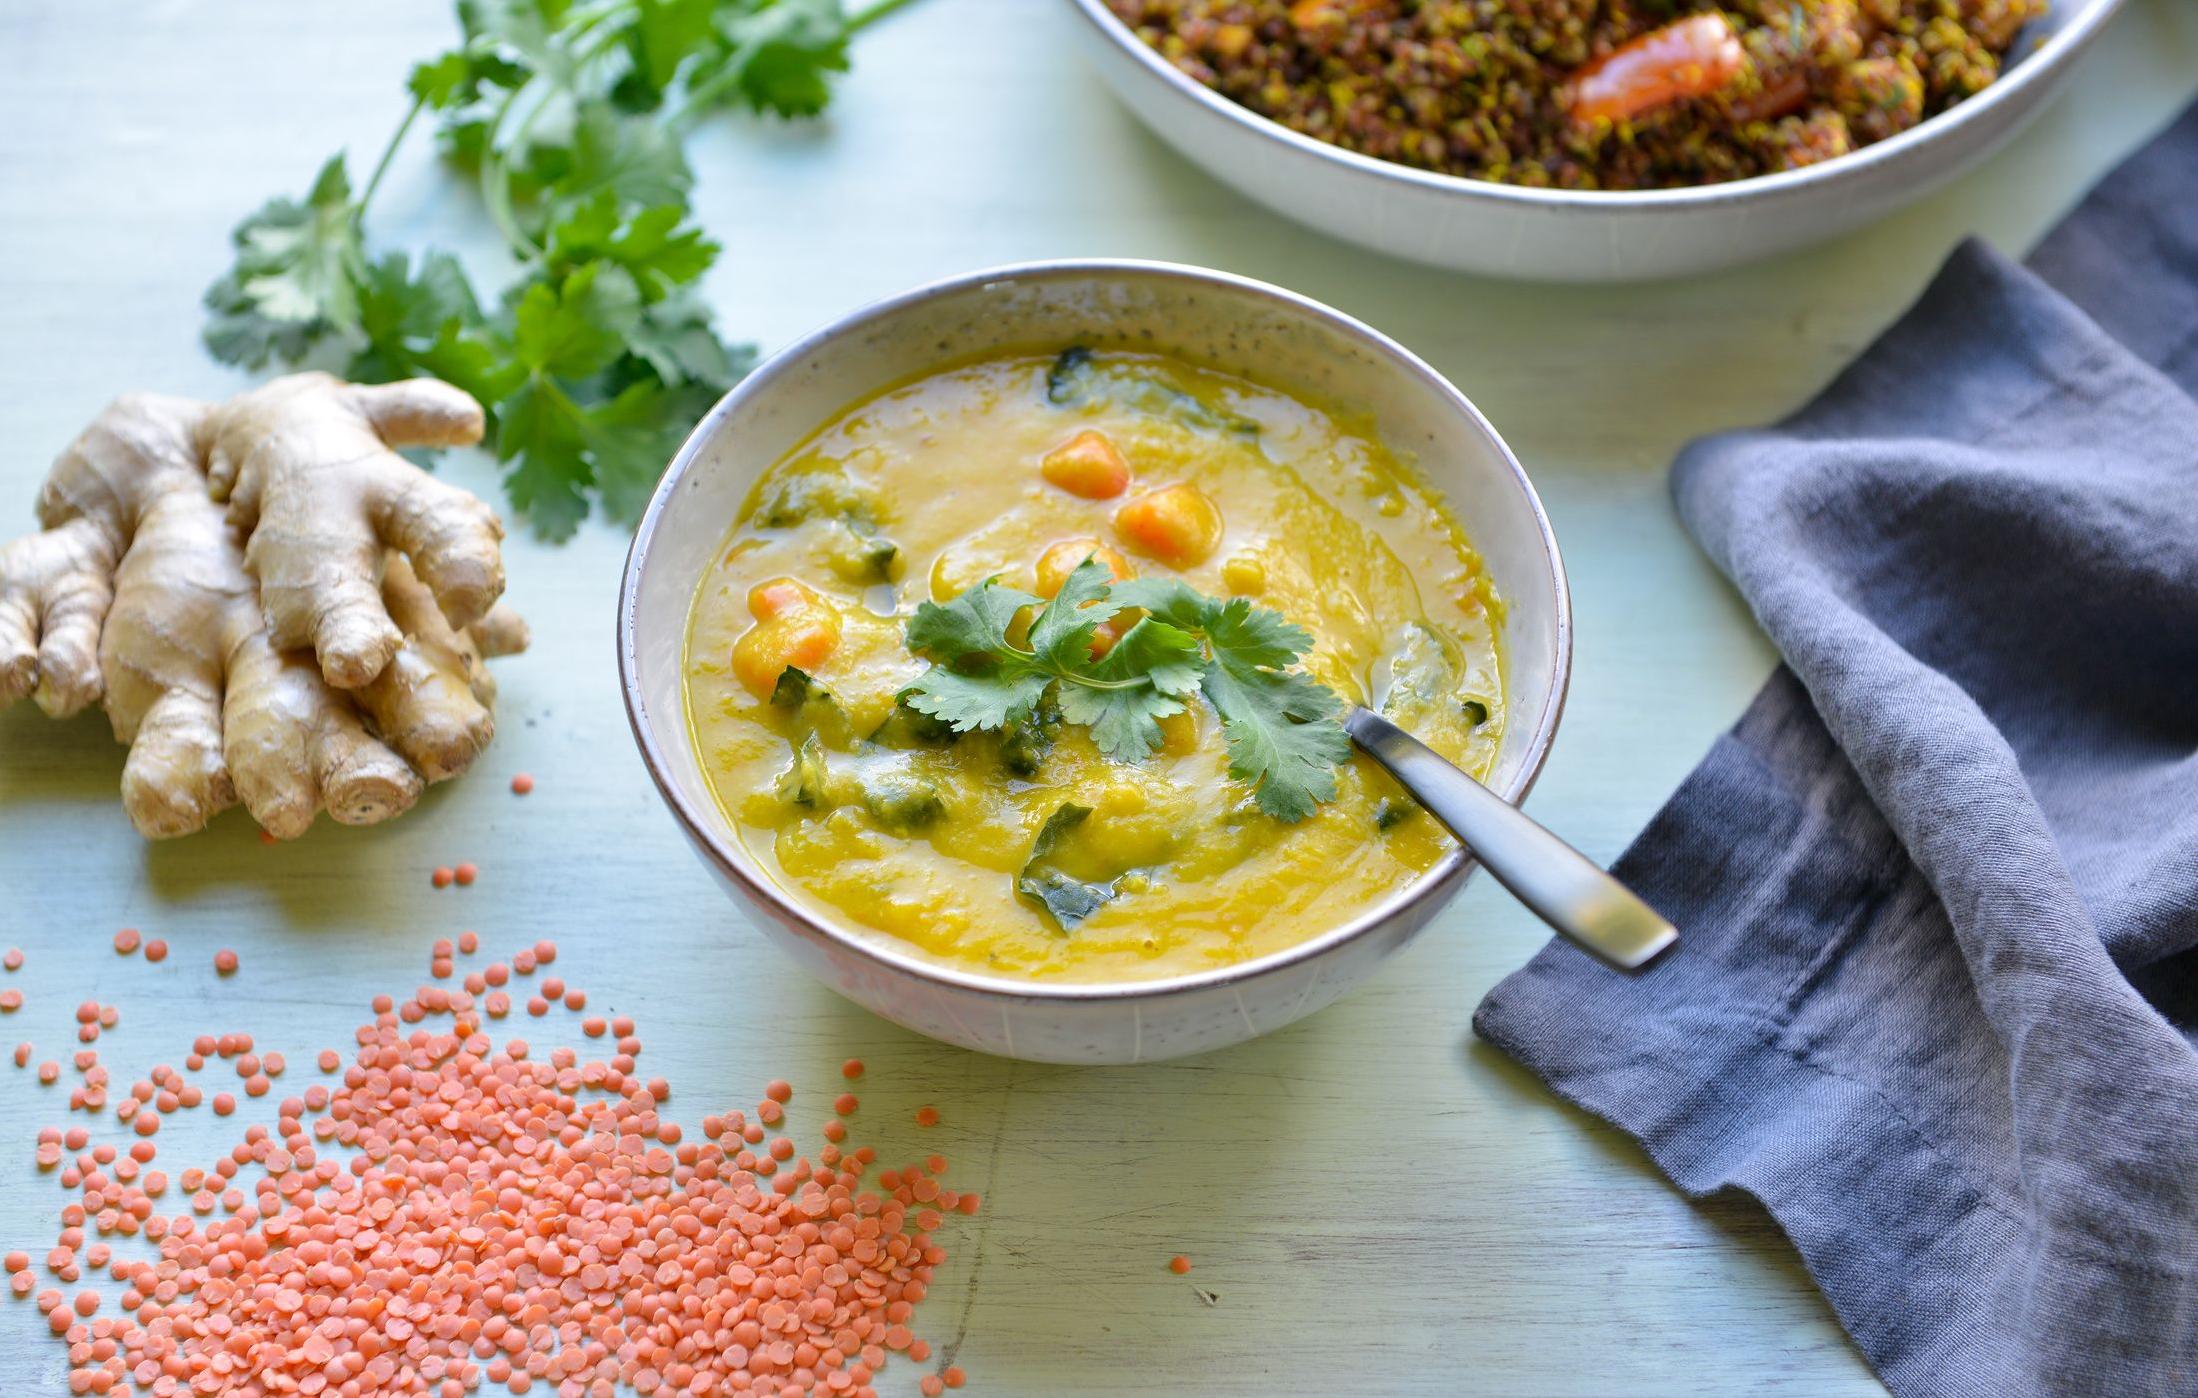  Cozy up with a bowl of lentil soup featuring flavorful red yeast rice